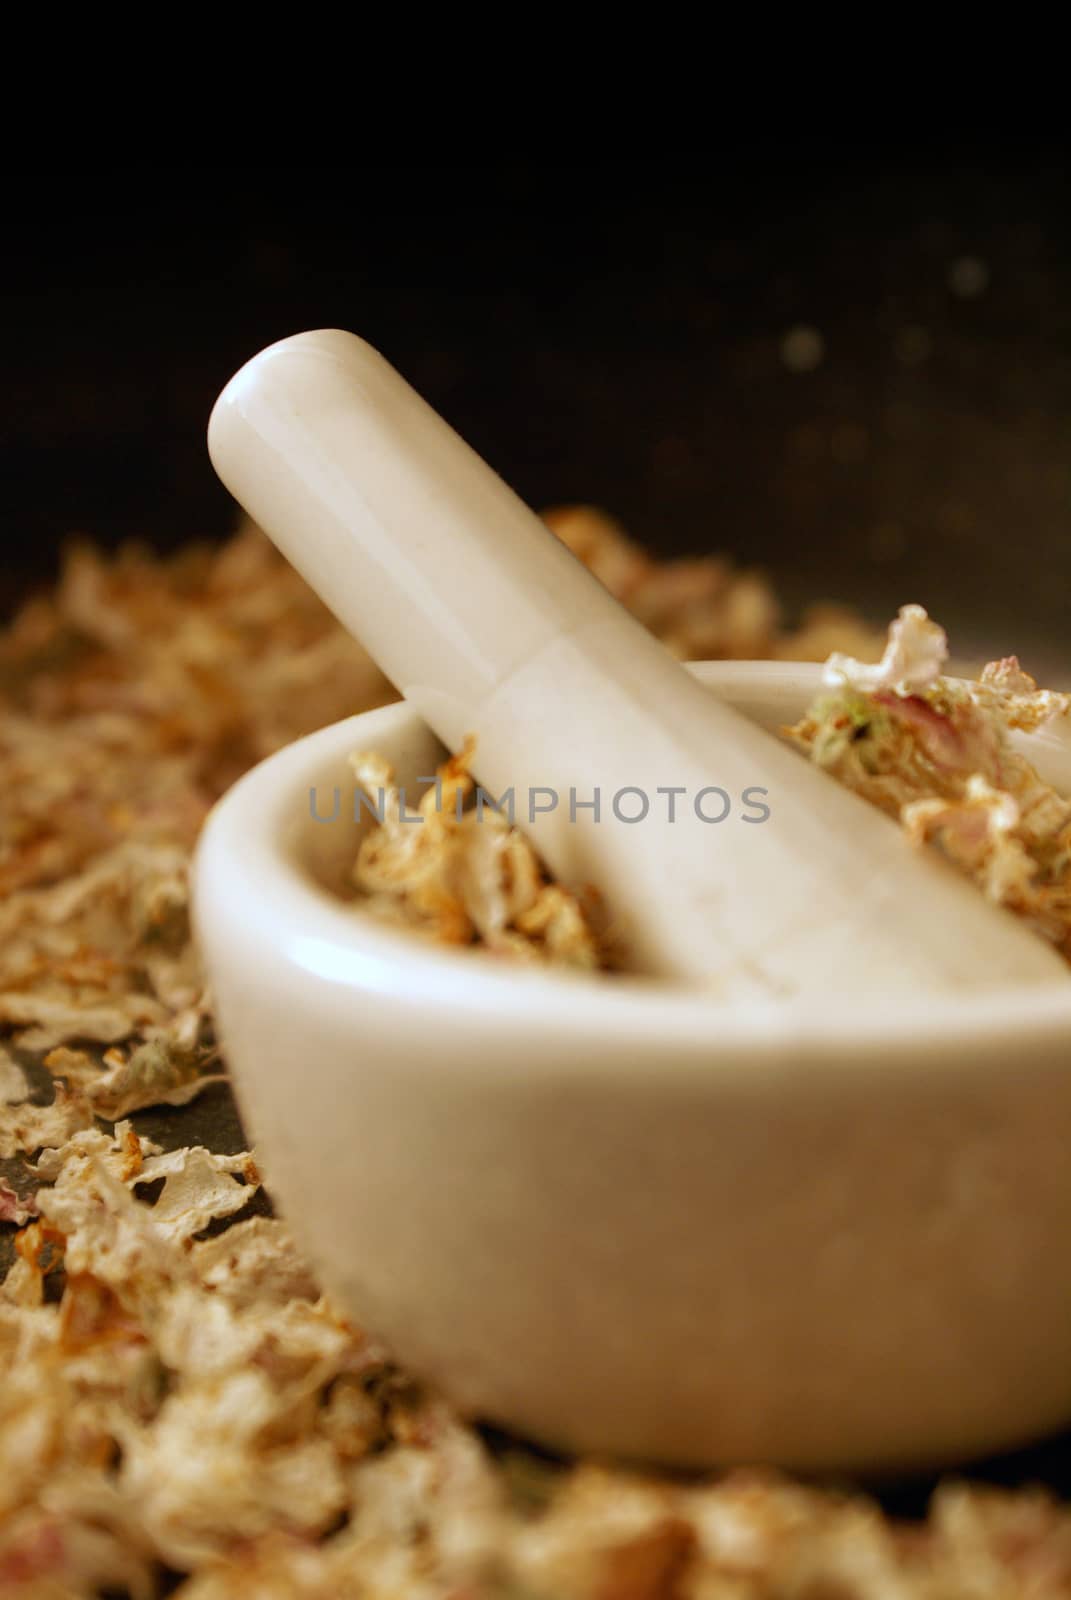 A vertical orientation of a mortar and pestle ready for preparing some dried Apple Blossoms into herbals for medical uses.